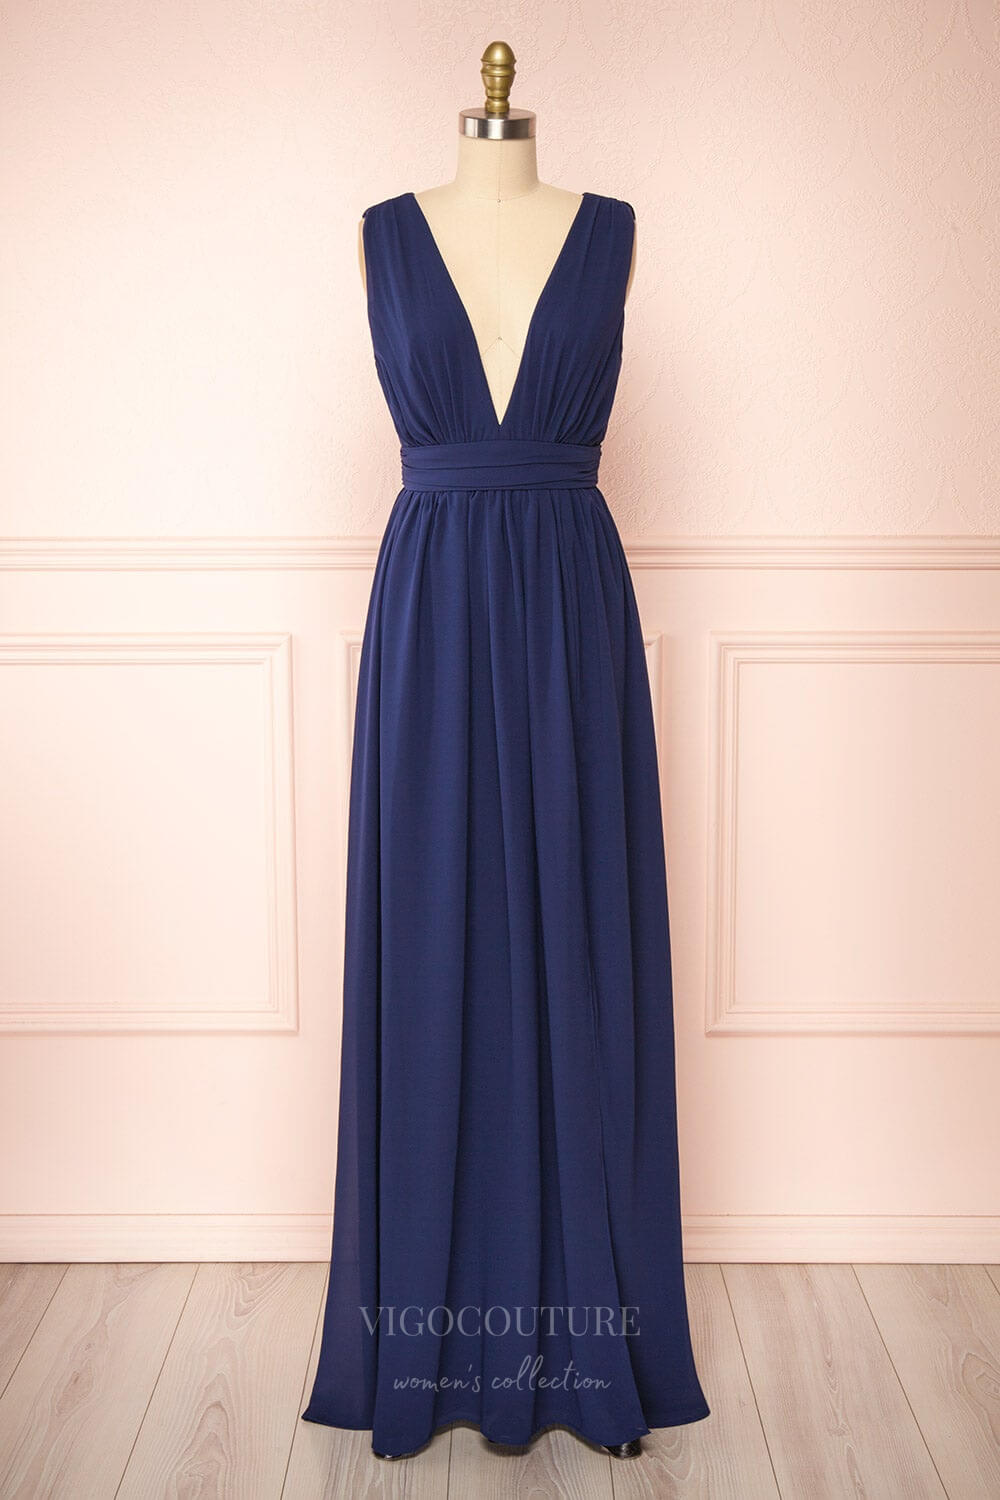 vigocouture-Stretchable Woven Bridesmaid Dress Plunging V-Neck Pleated Prom Dress 20861-Prom Dresses-vigocouture-Navy Blue-US2-